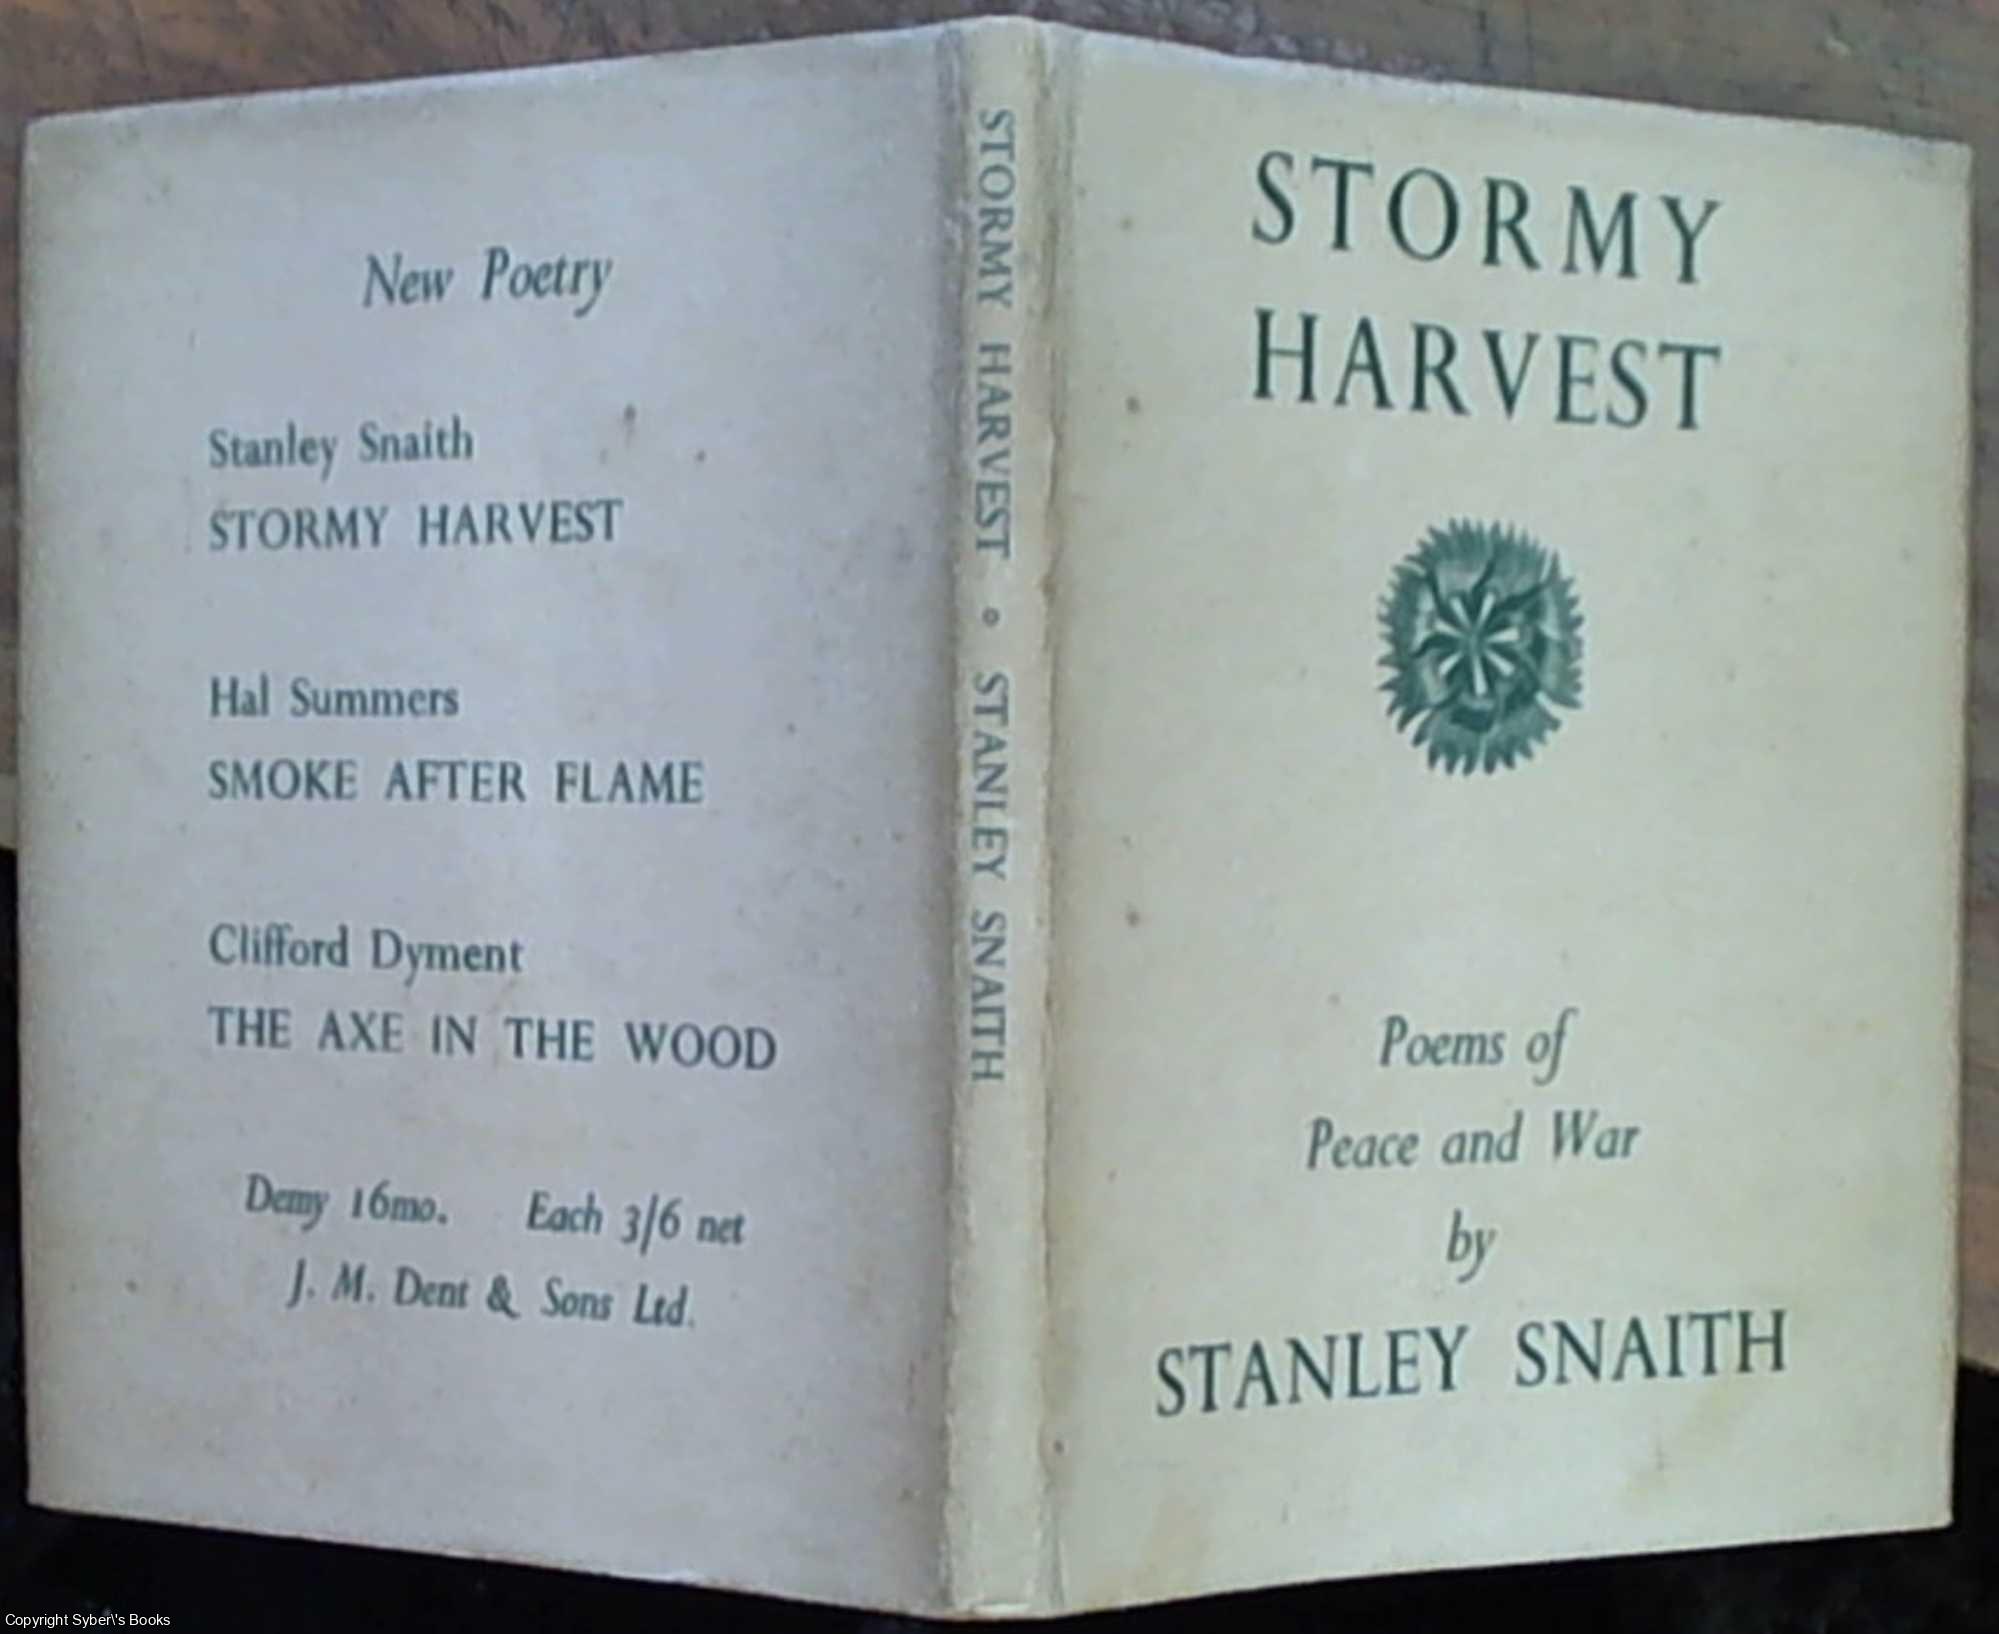 Snaith, Sidney - Stormy Harvest: Poems of Peace and War